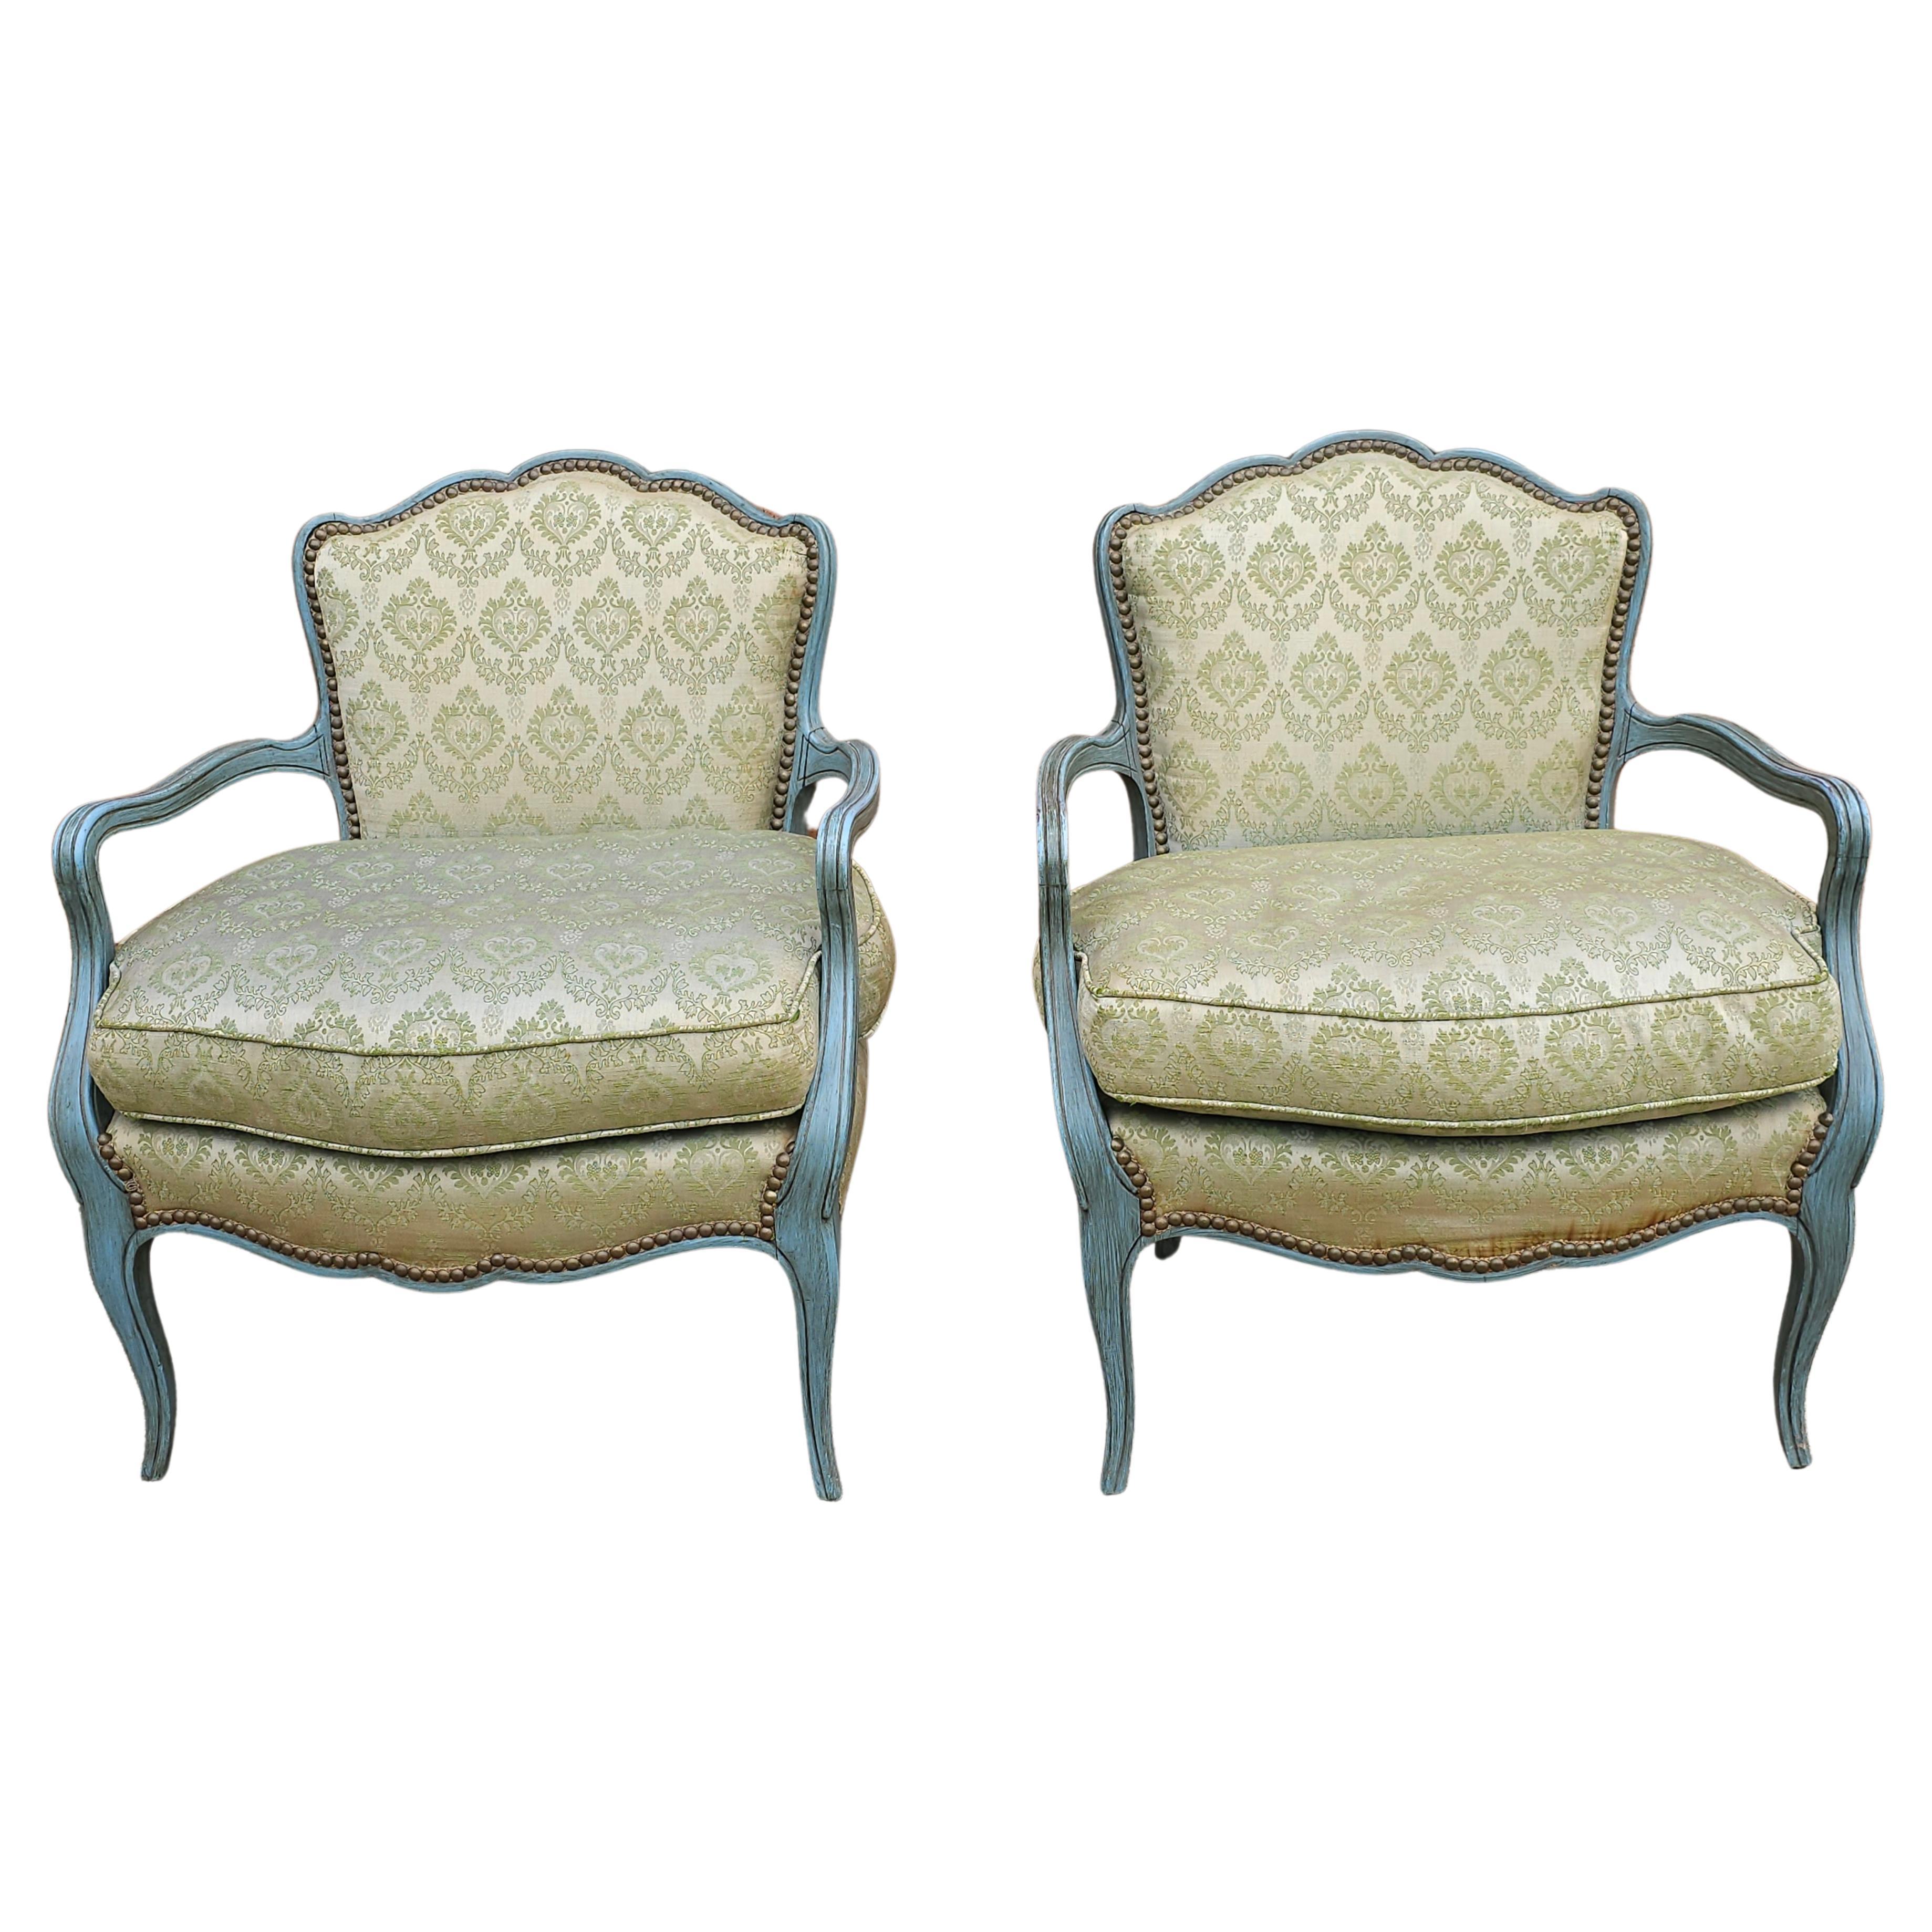 Pair French Provincial Green Painted And Upholstered Low Fauteuils / Bergeres